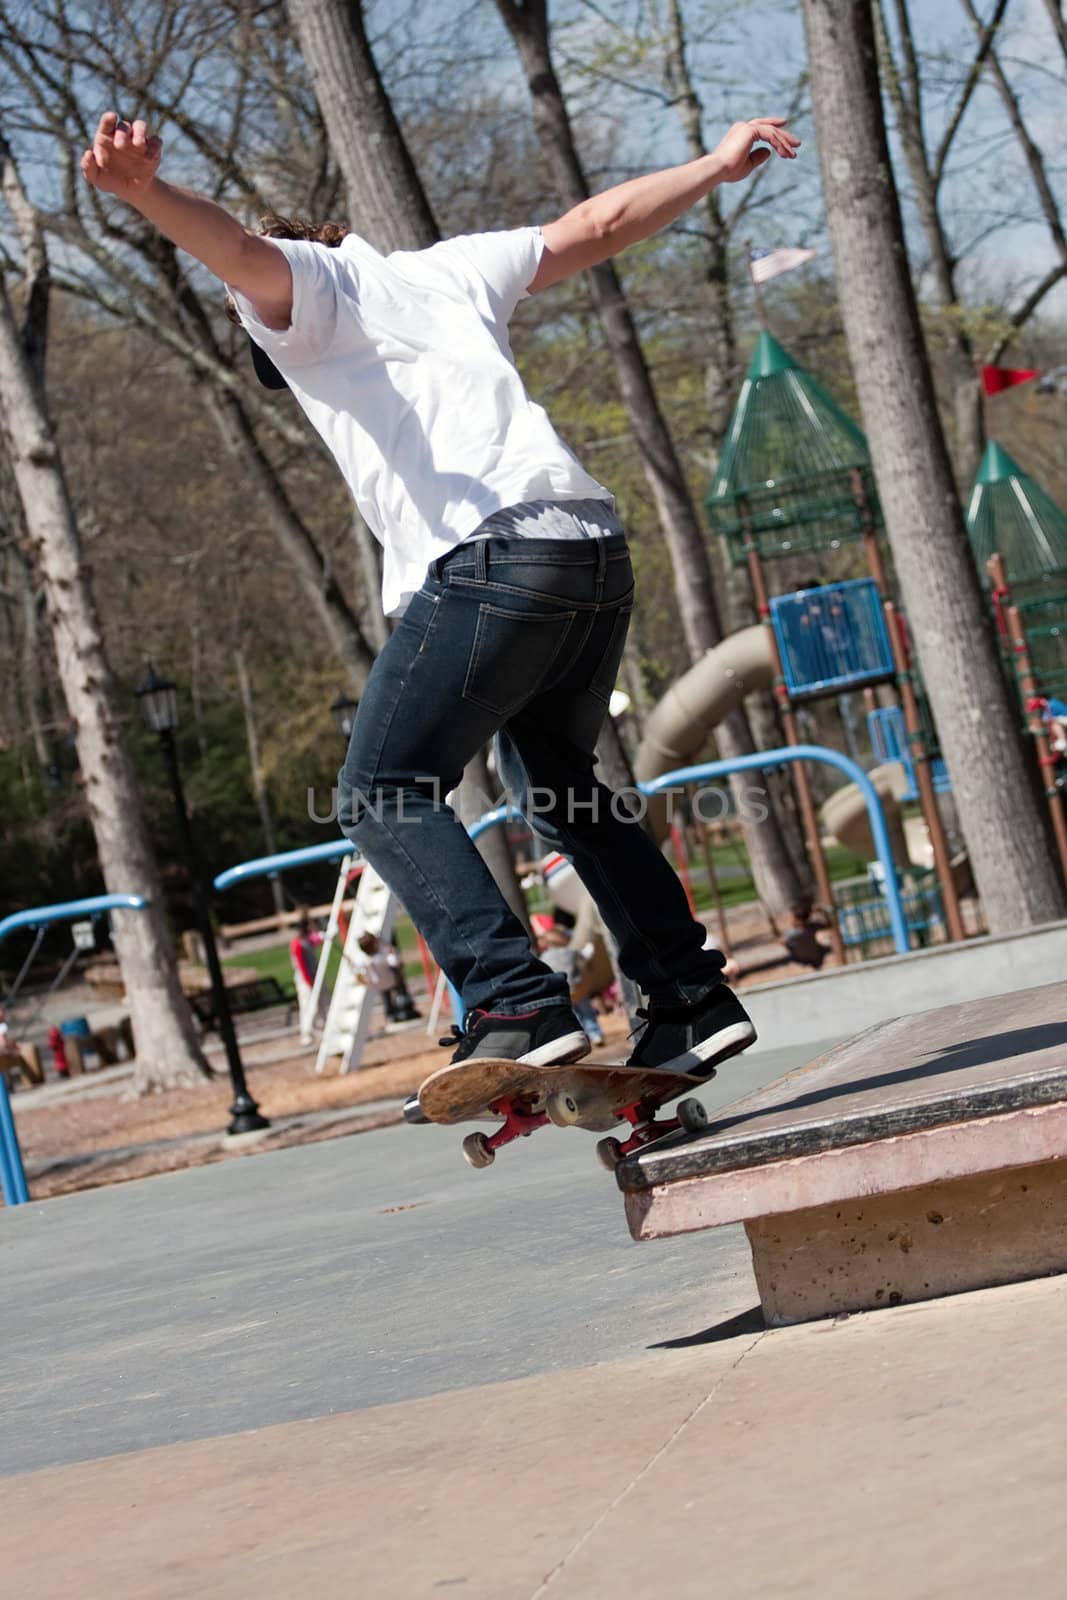 Action shot of a skateboarder performing a jump at a skate park.